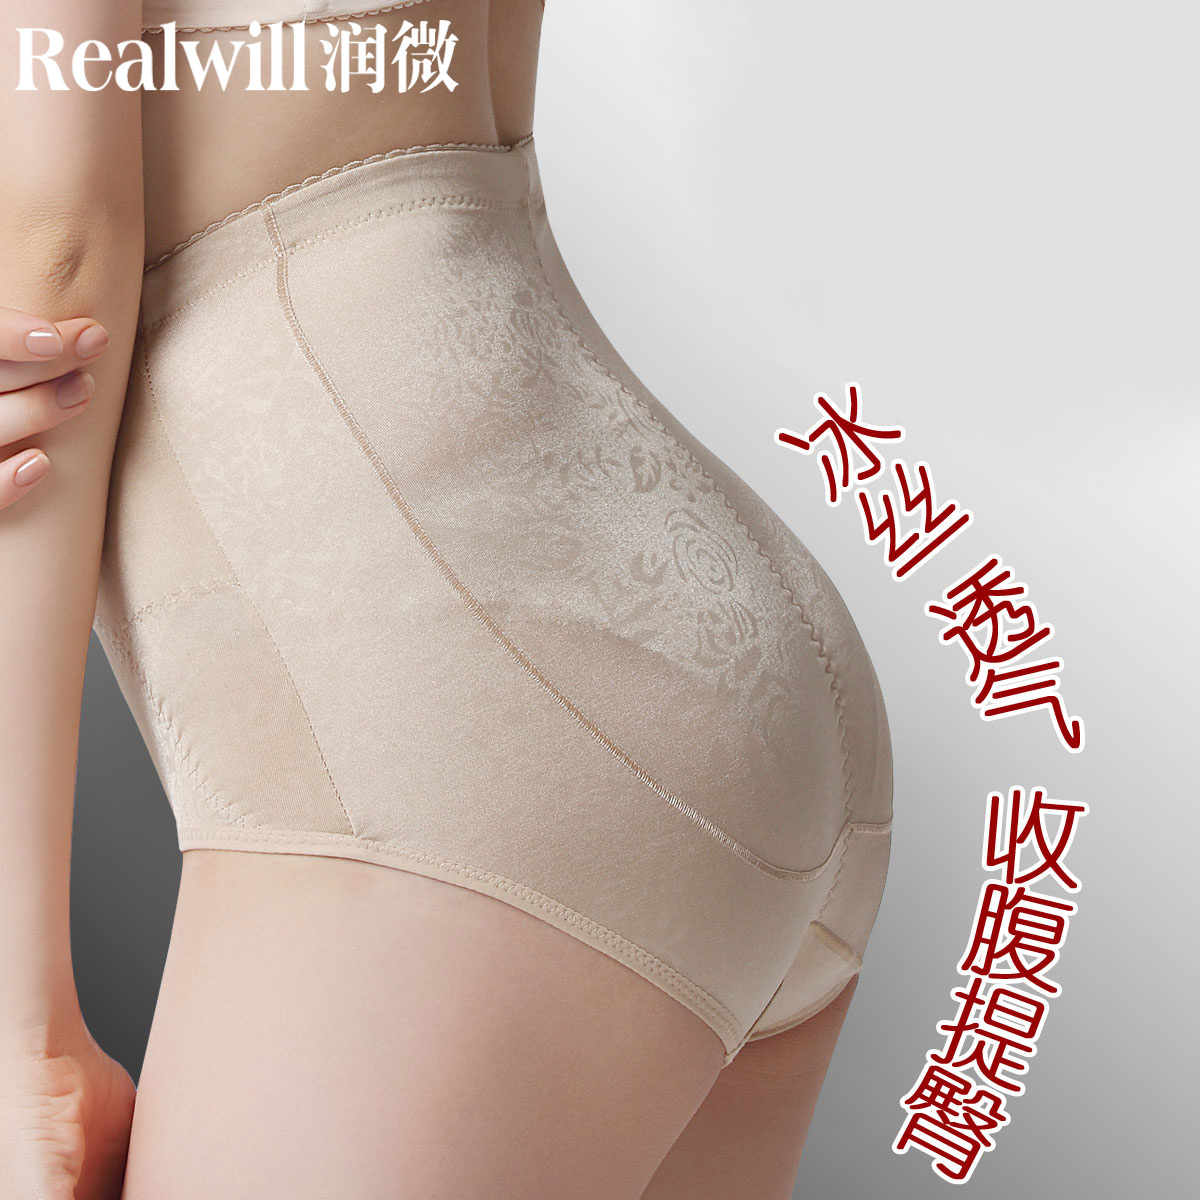 Realwill time viscose abdomen drawing butt-lifting high waist body shaping beauty care pants